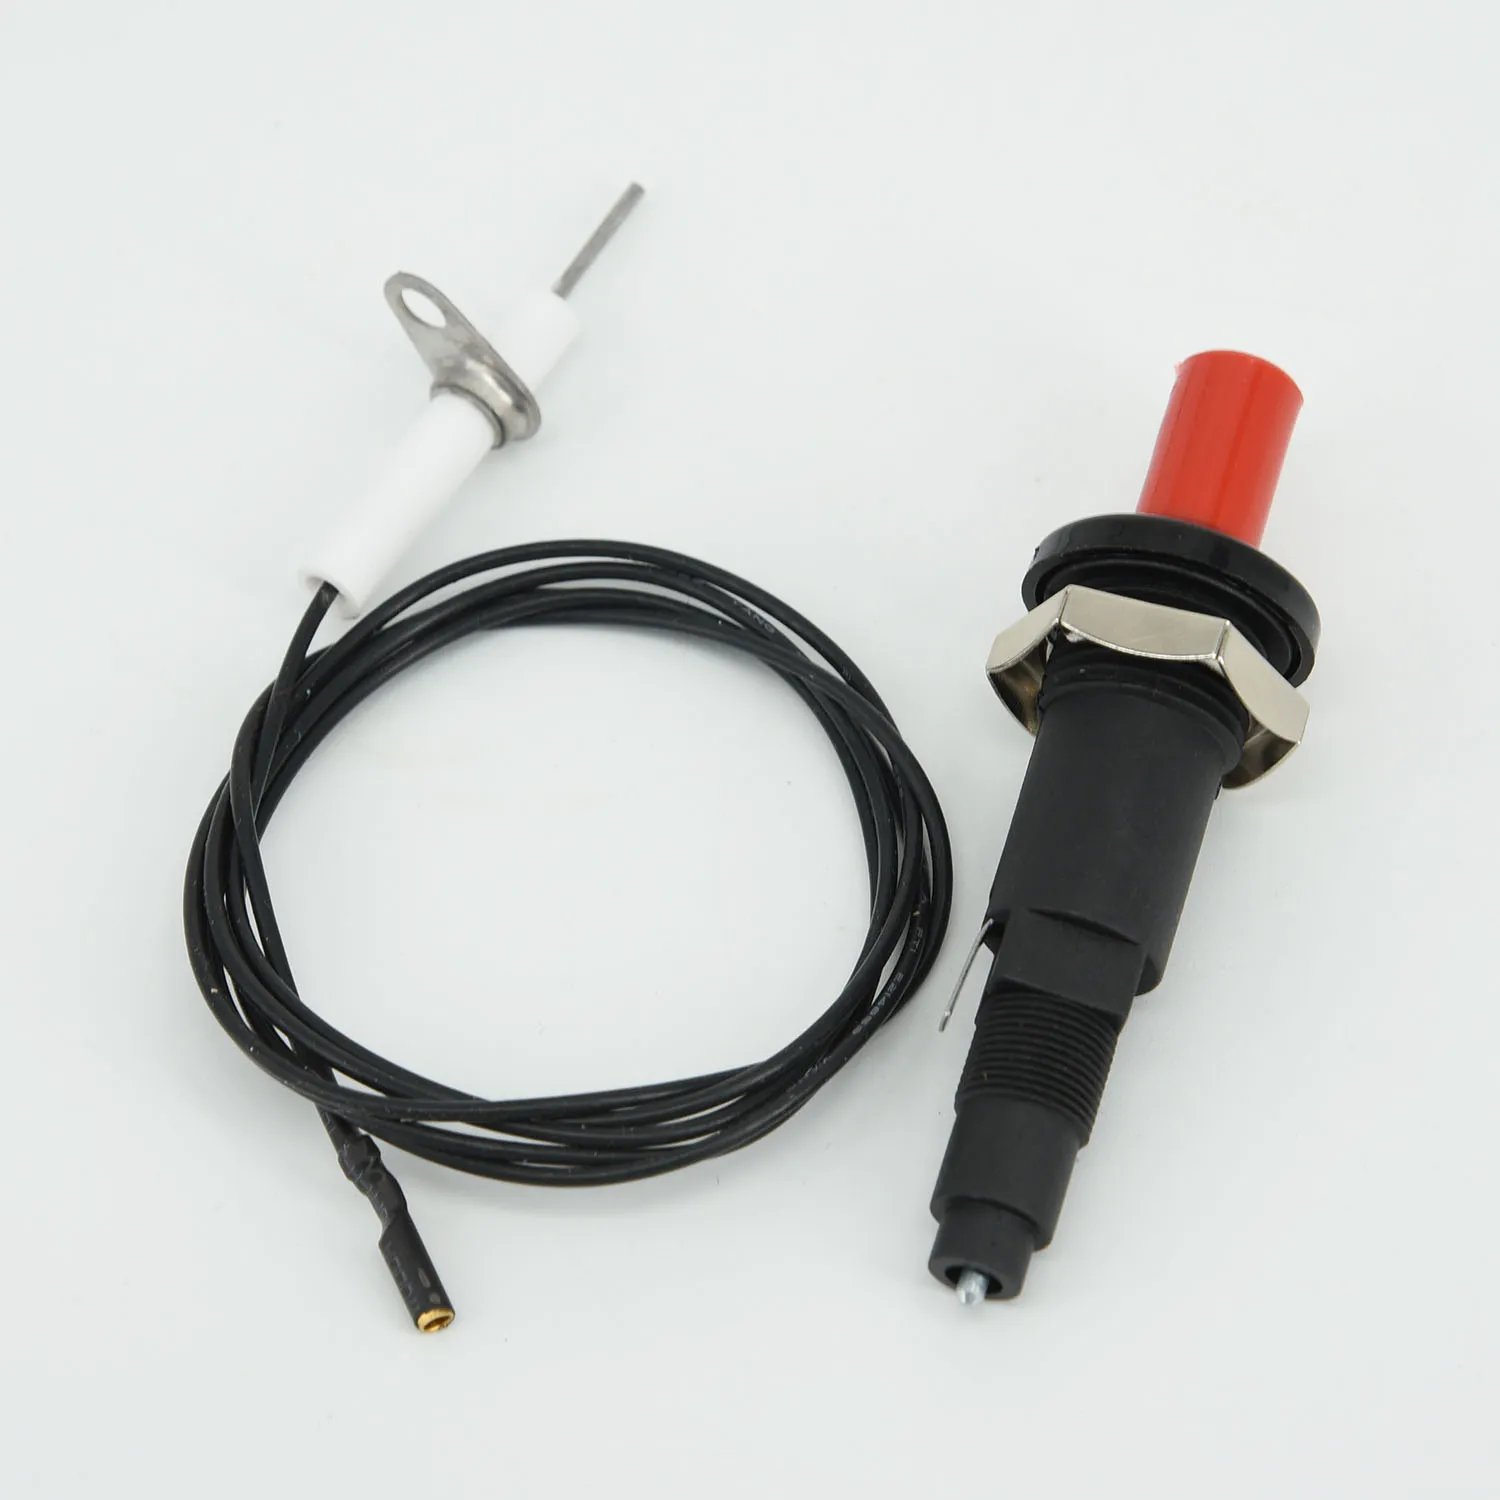 18MM UNIVERSAL BATTERY POWER PIEZO ELECTRIC SPARK IGNITER BBQ OVEN GRILL 